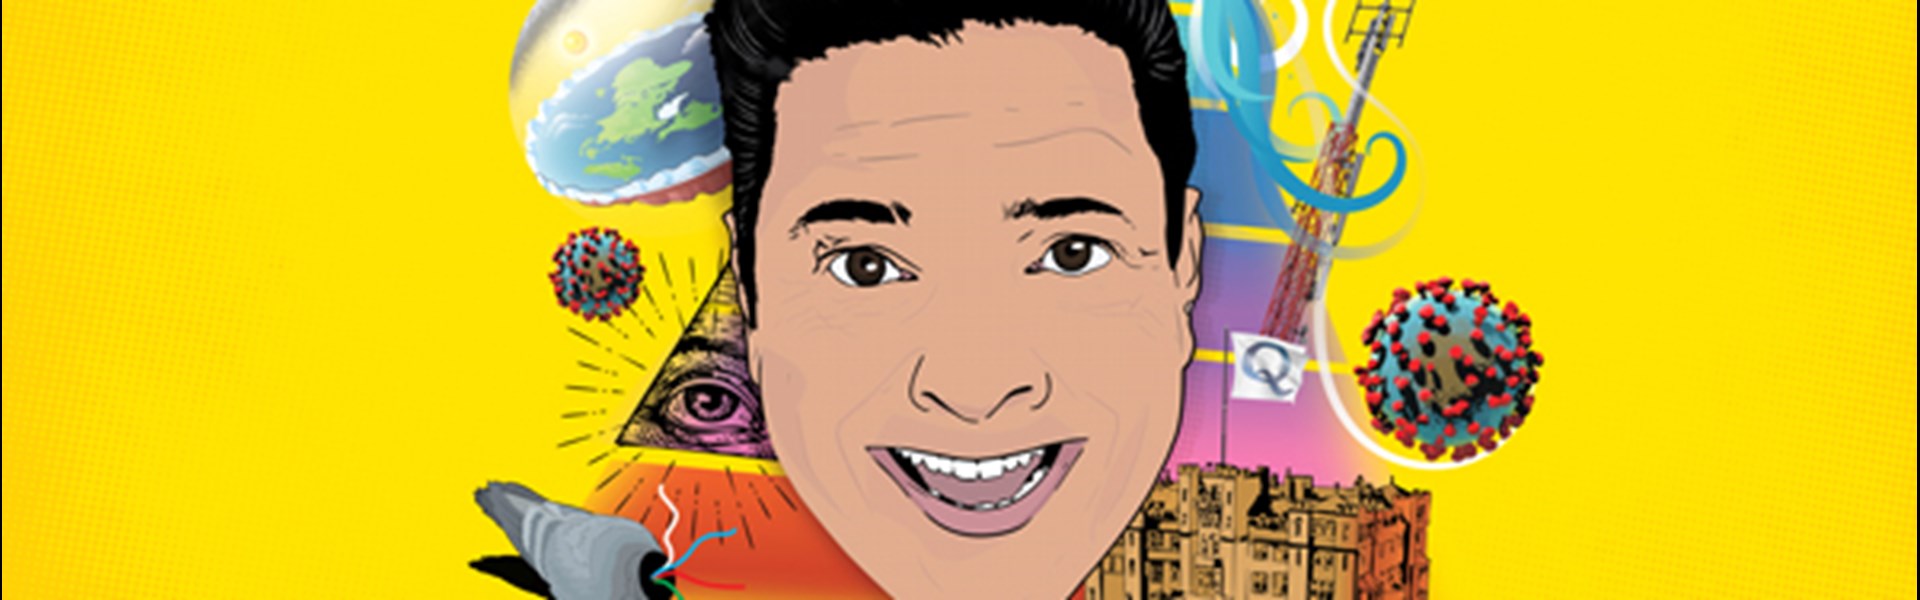 Dom Joly - The Conspiracy Tour